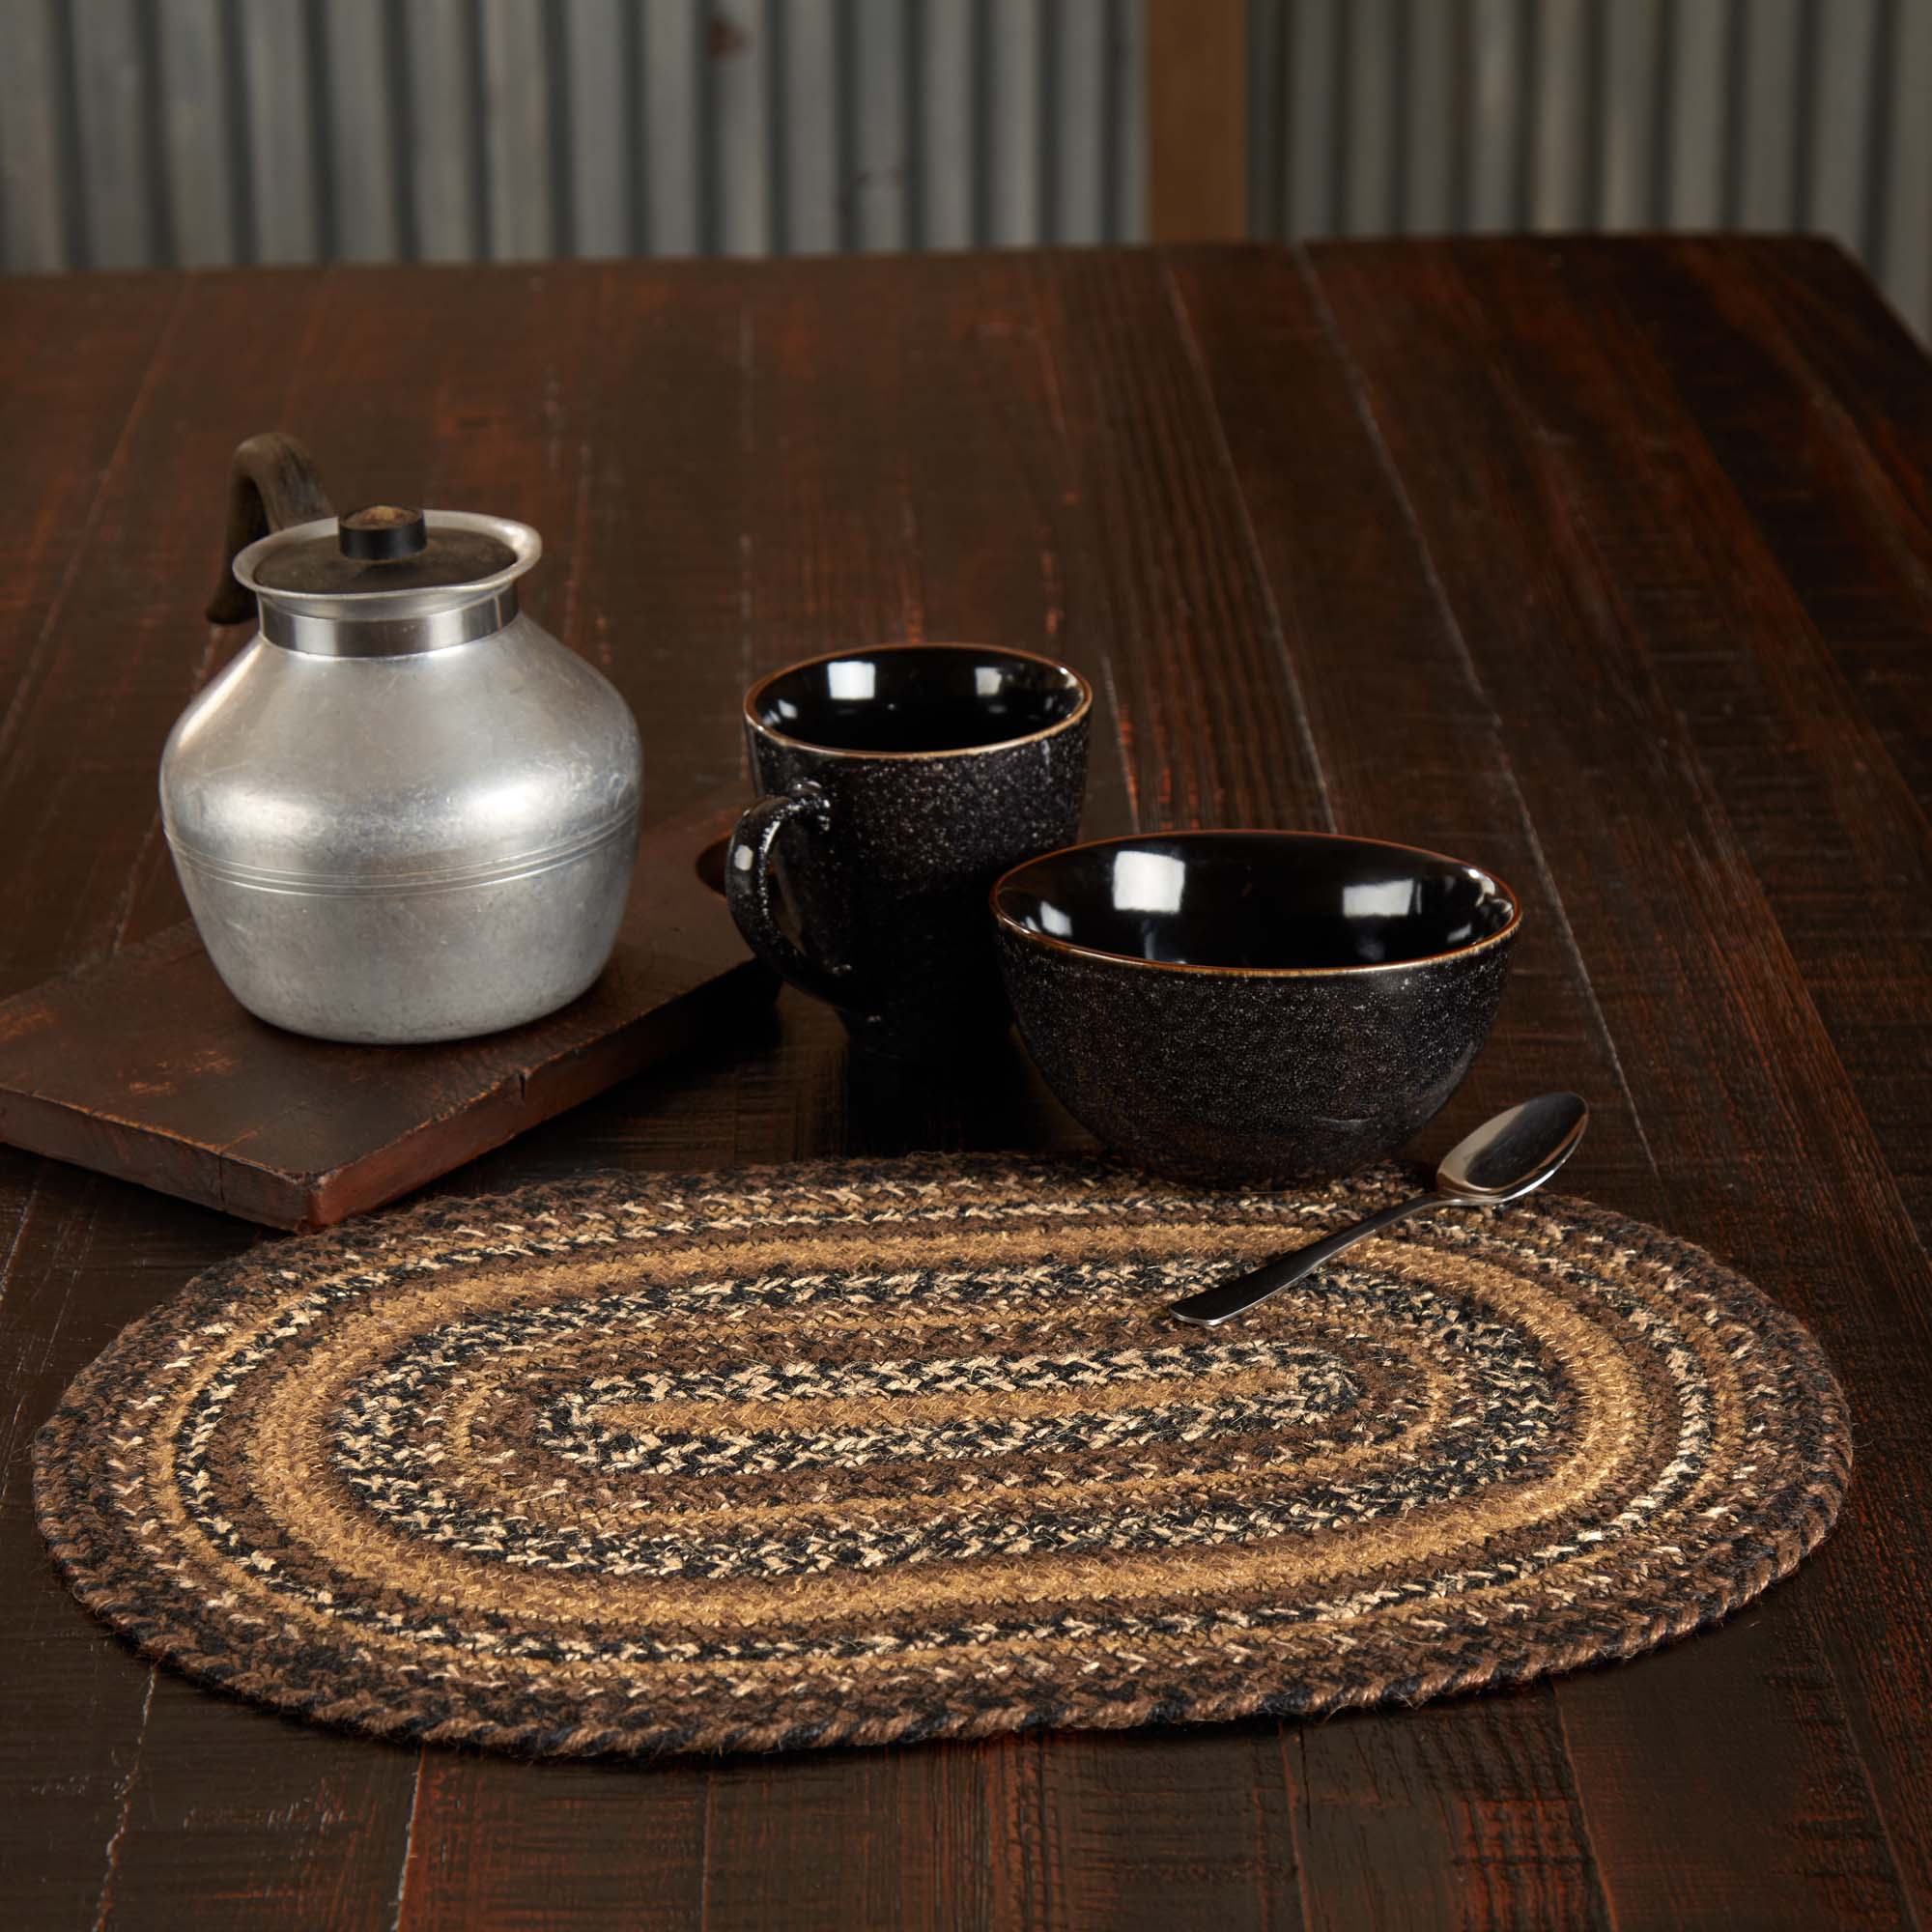 Espresso Jute Braided Oval Placemat 12"x18" VHC Brands